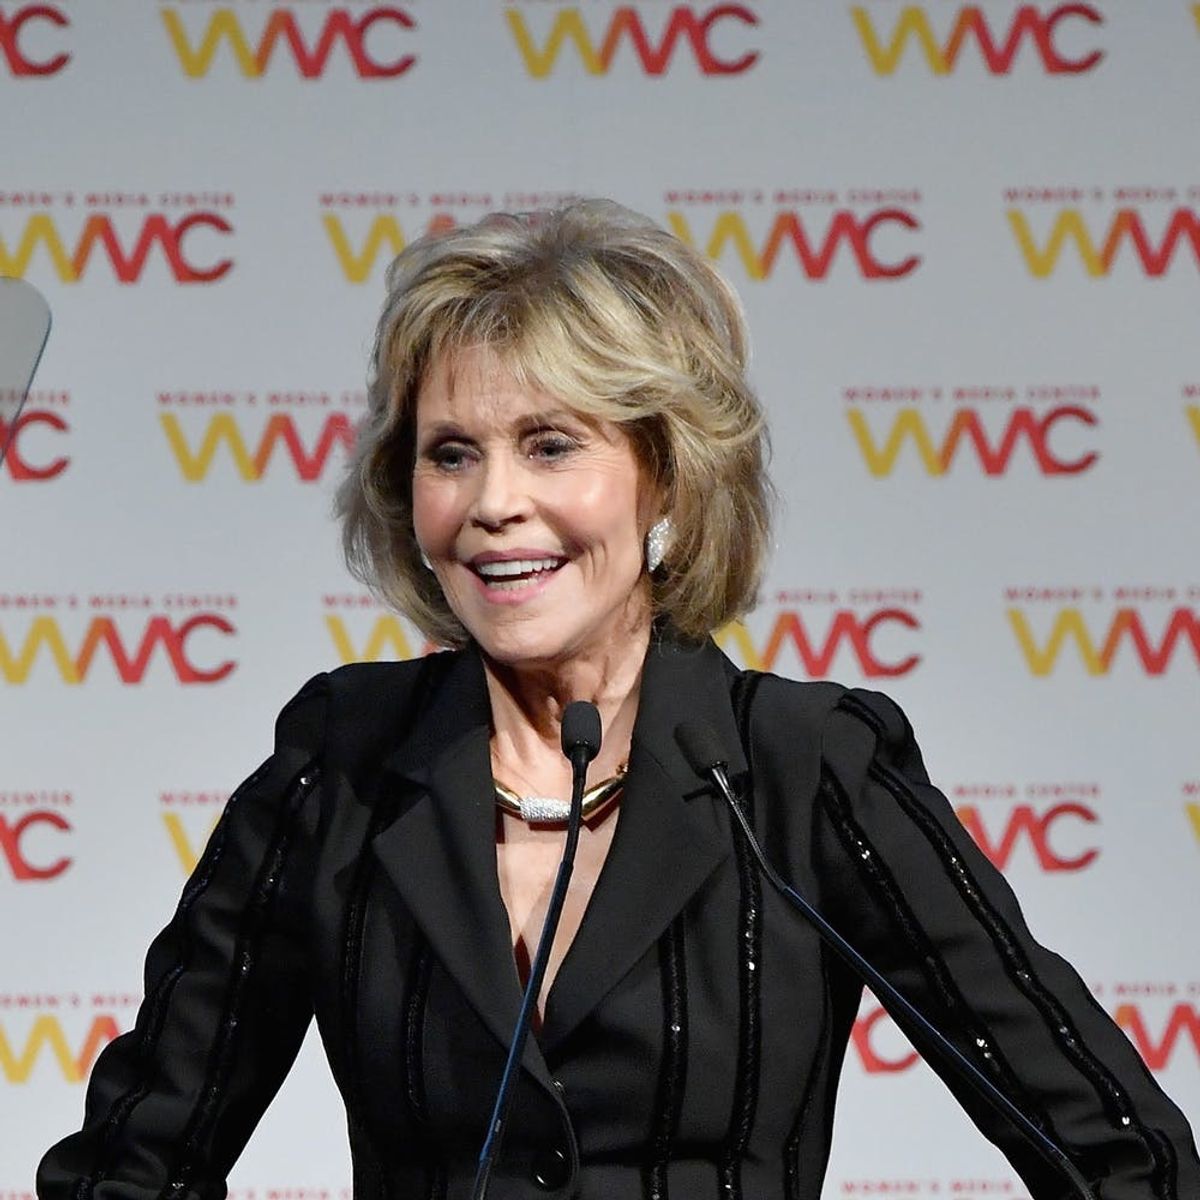 Jane Fonda on the Weinstein Scandal: People Care Because the Victims Are “Famous and White”